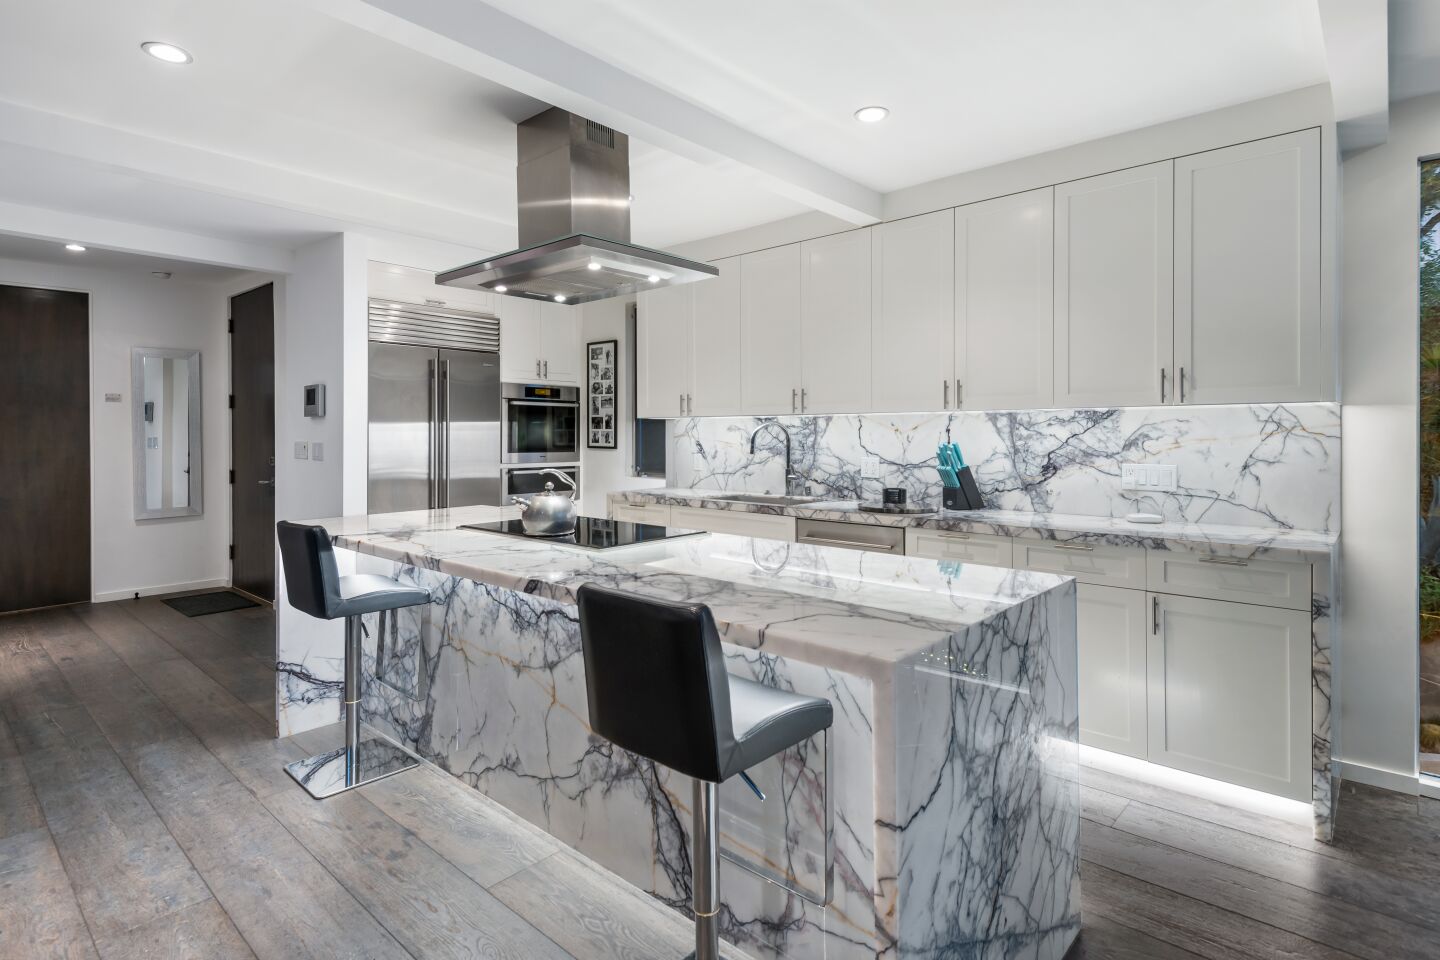 The marble kitchen.